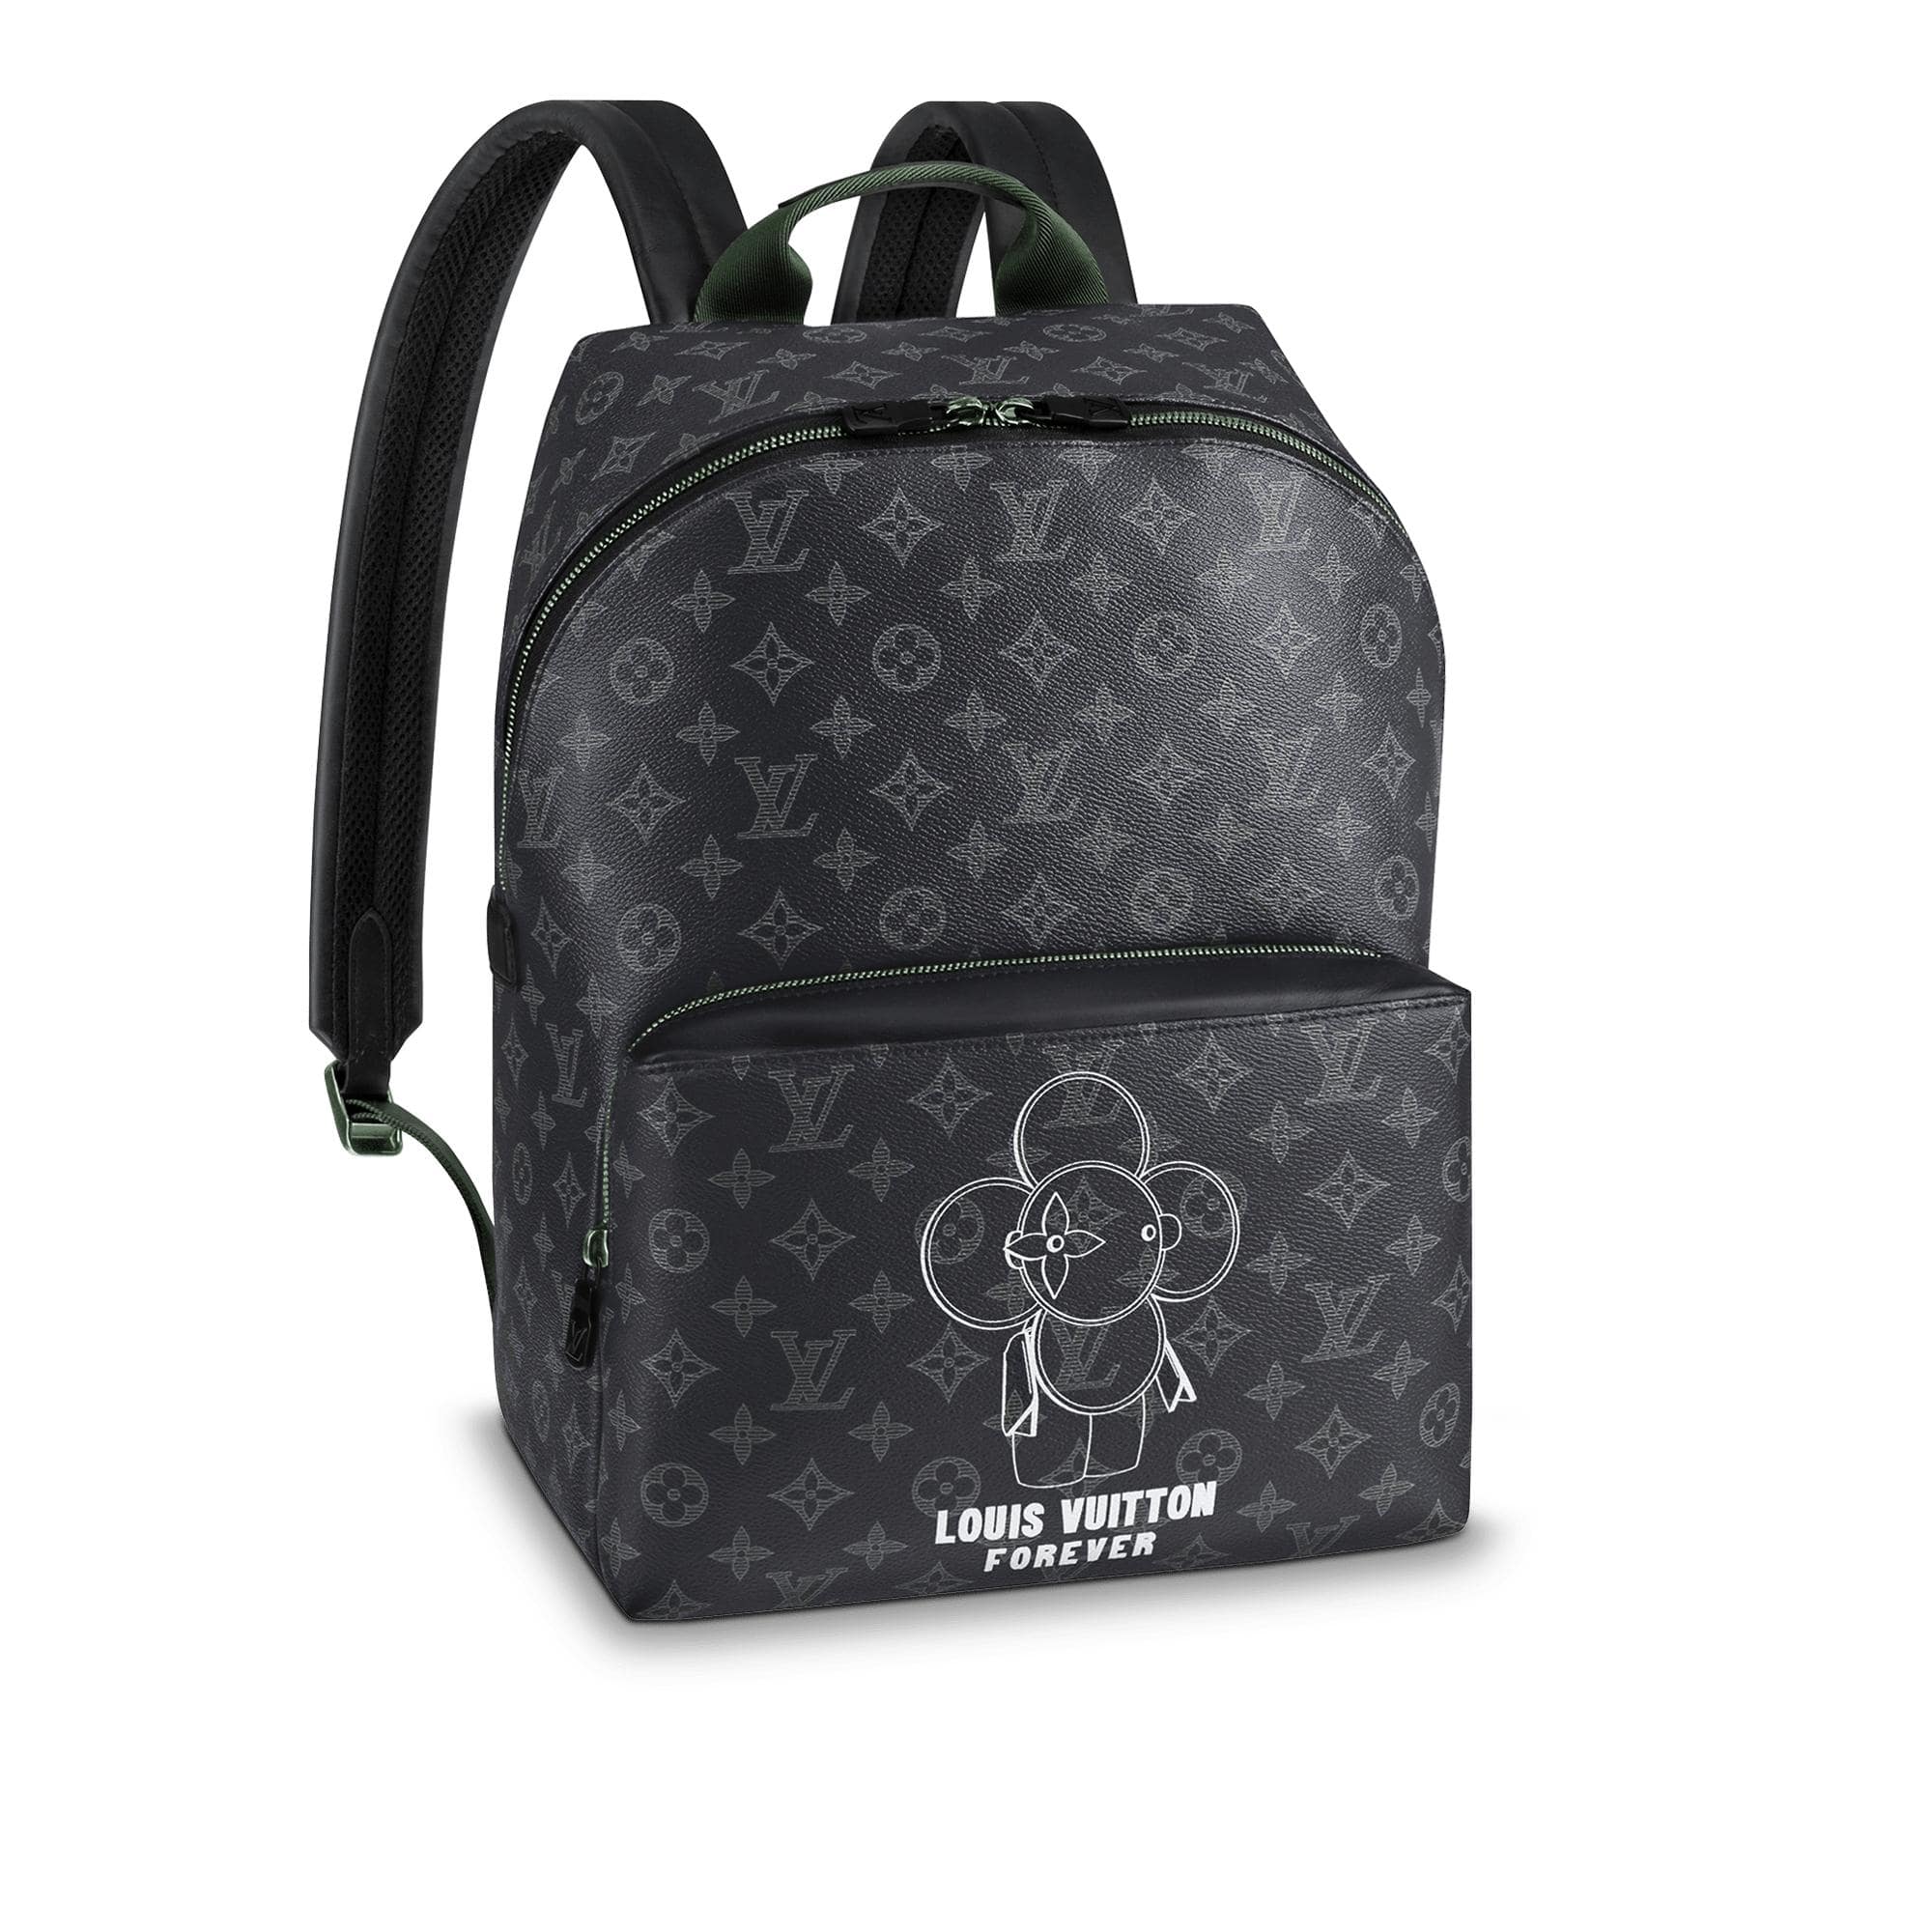 gucci louis vuitton backpack